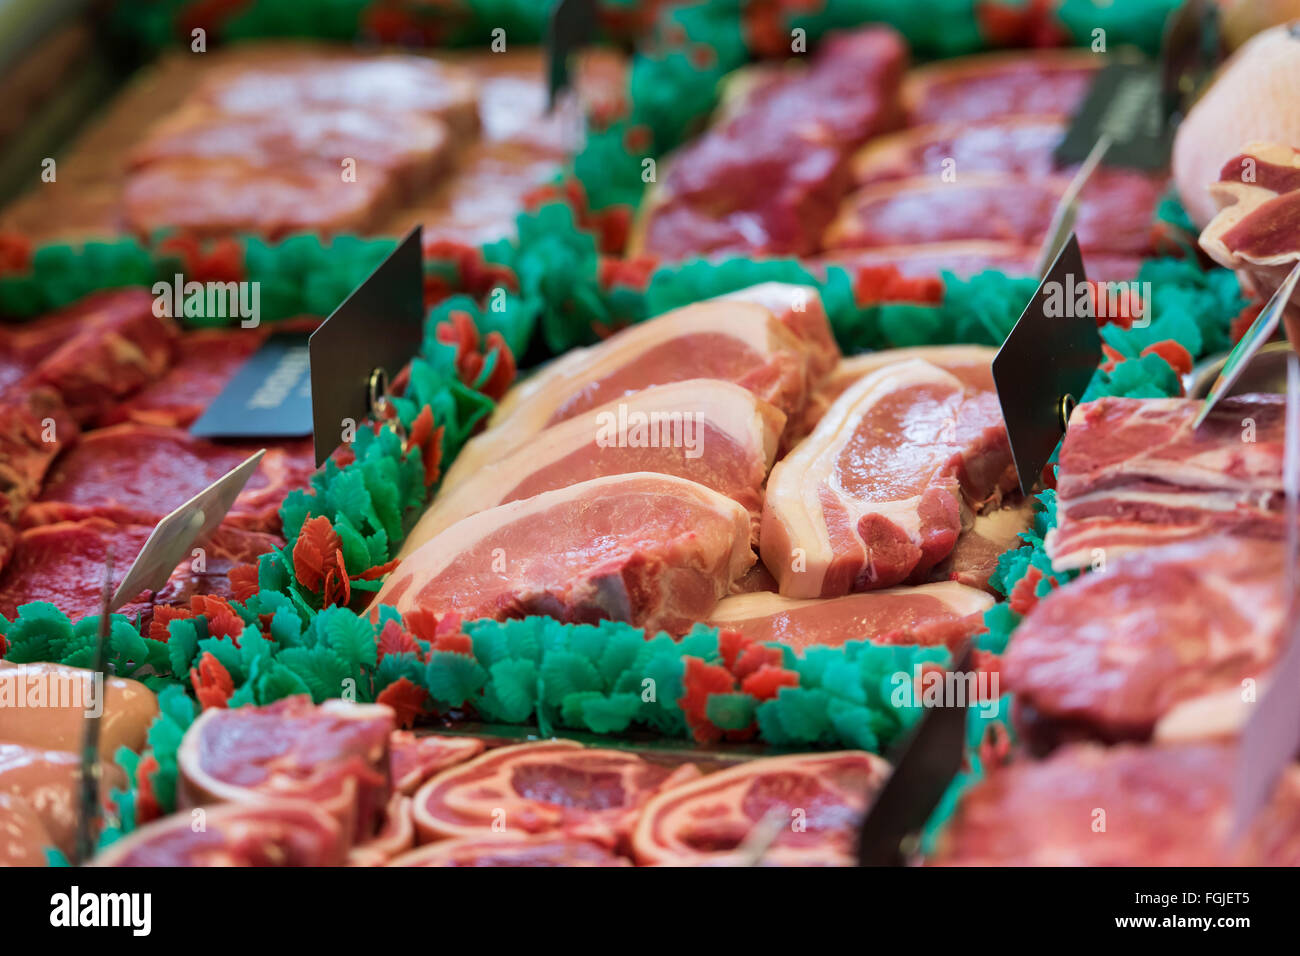 Red meat on display in a butcher's shop window. Stock Photo